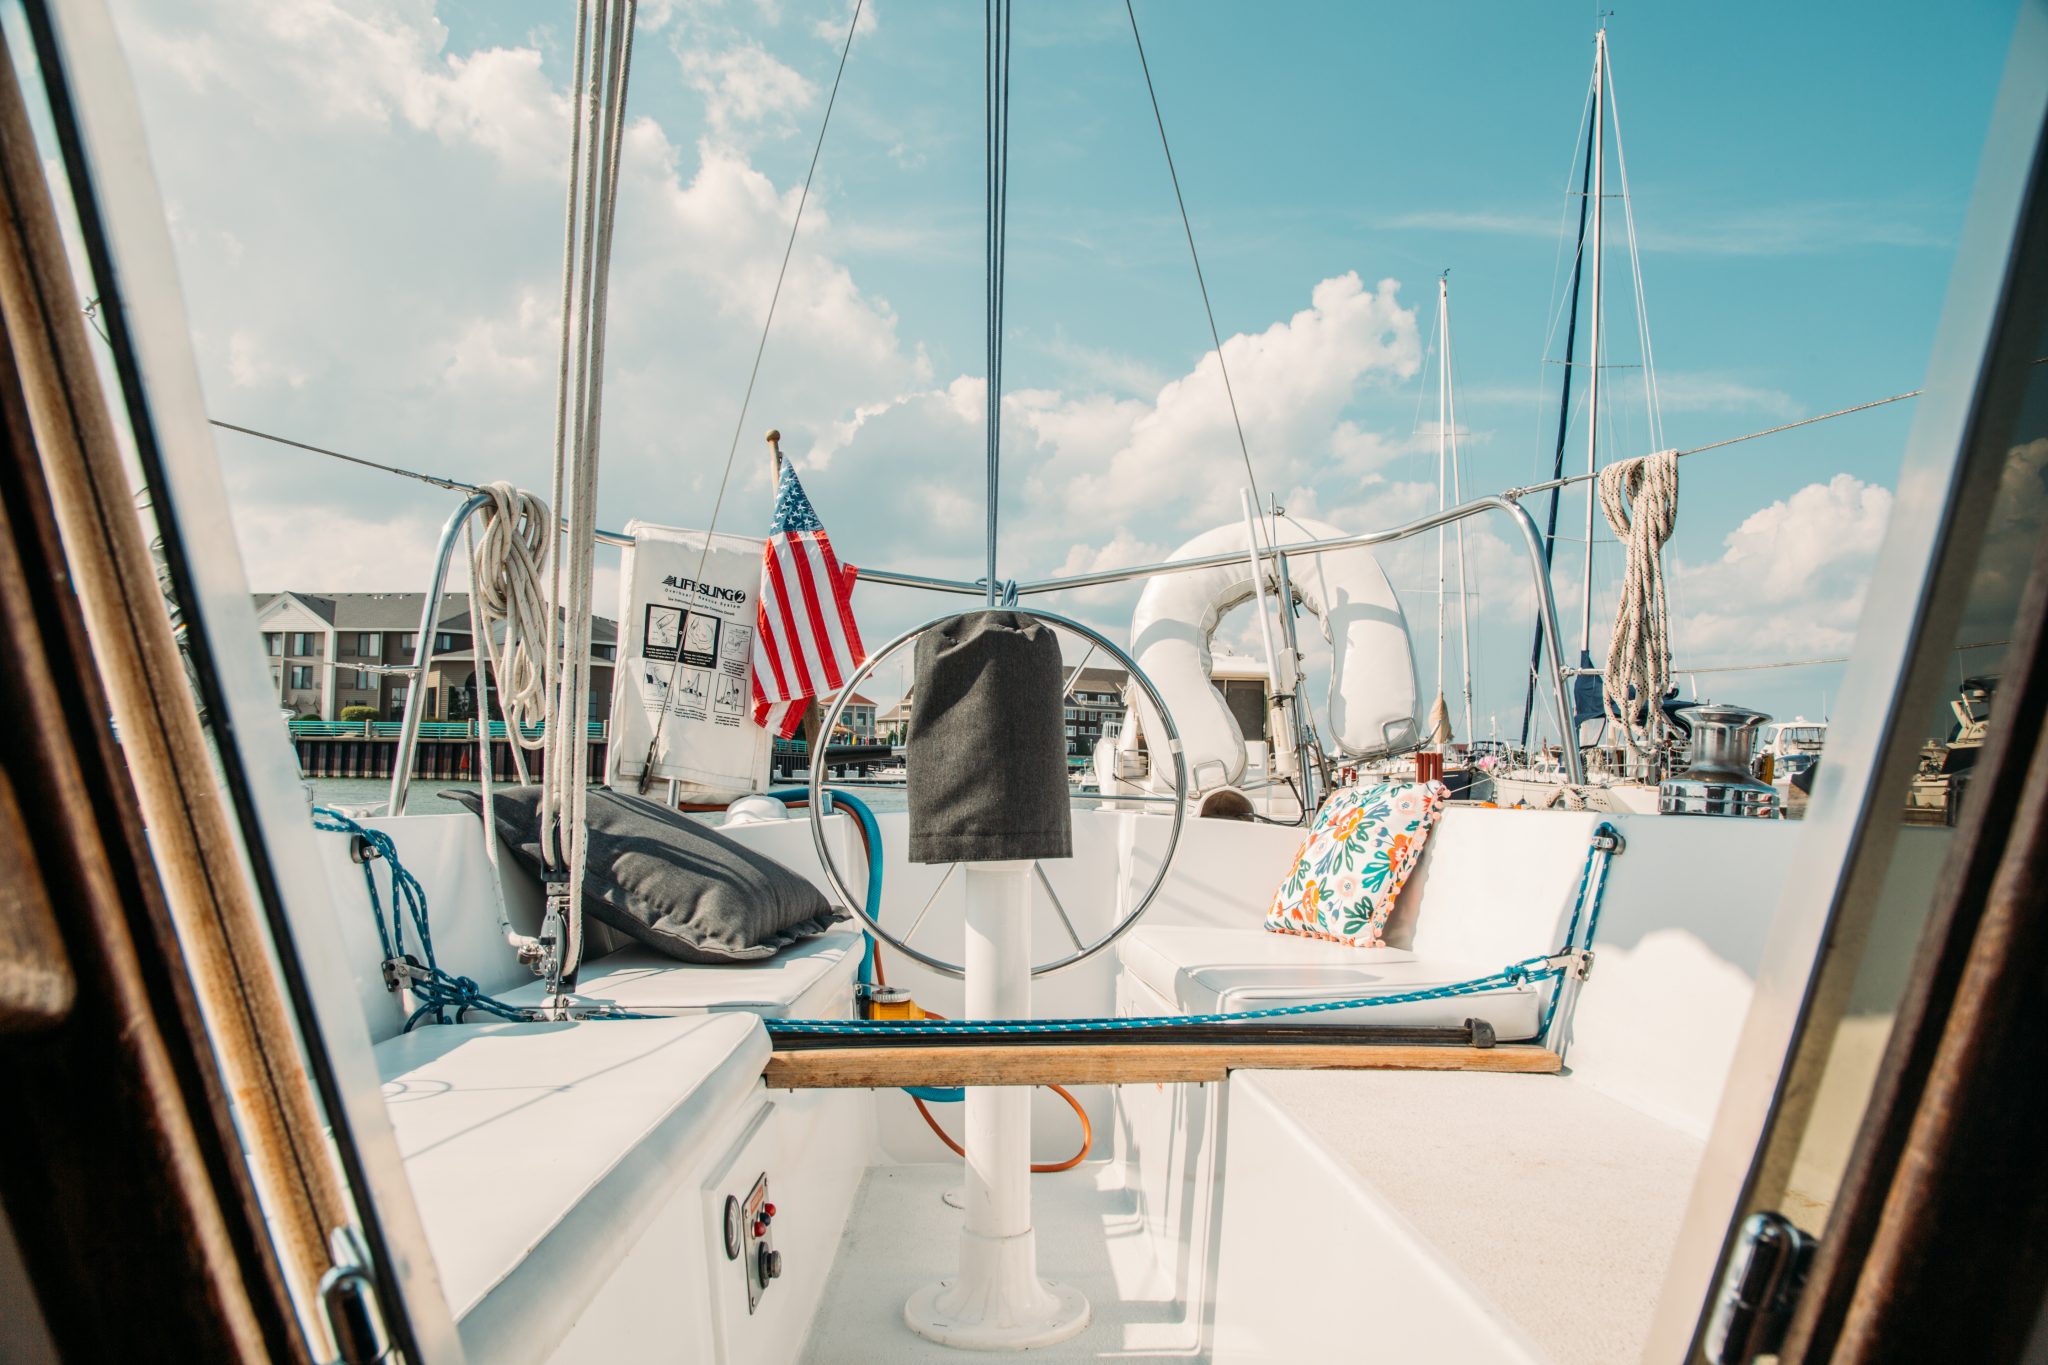 Staying on a Sailboat Airbnb in Wisconsin – What to Expect